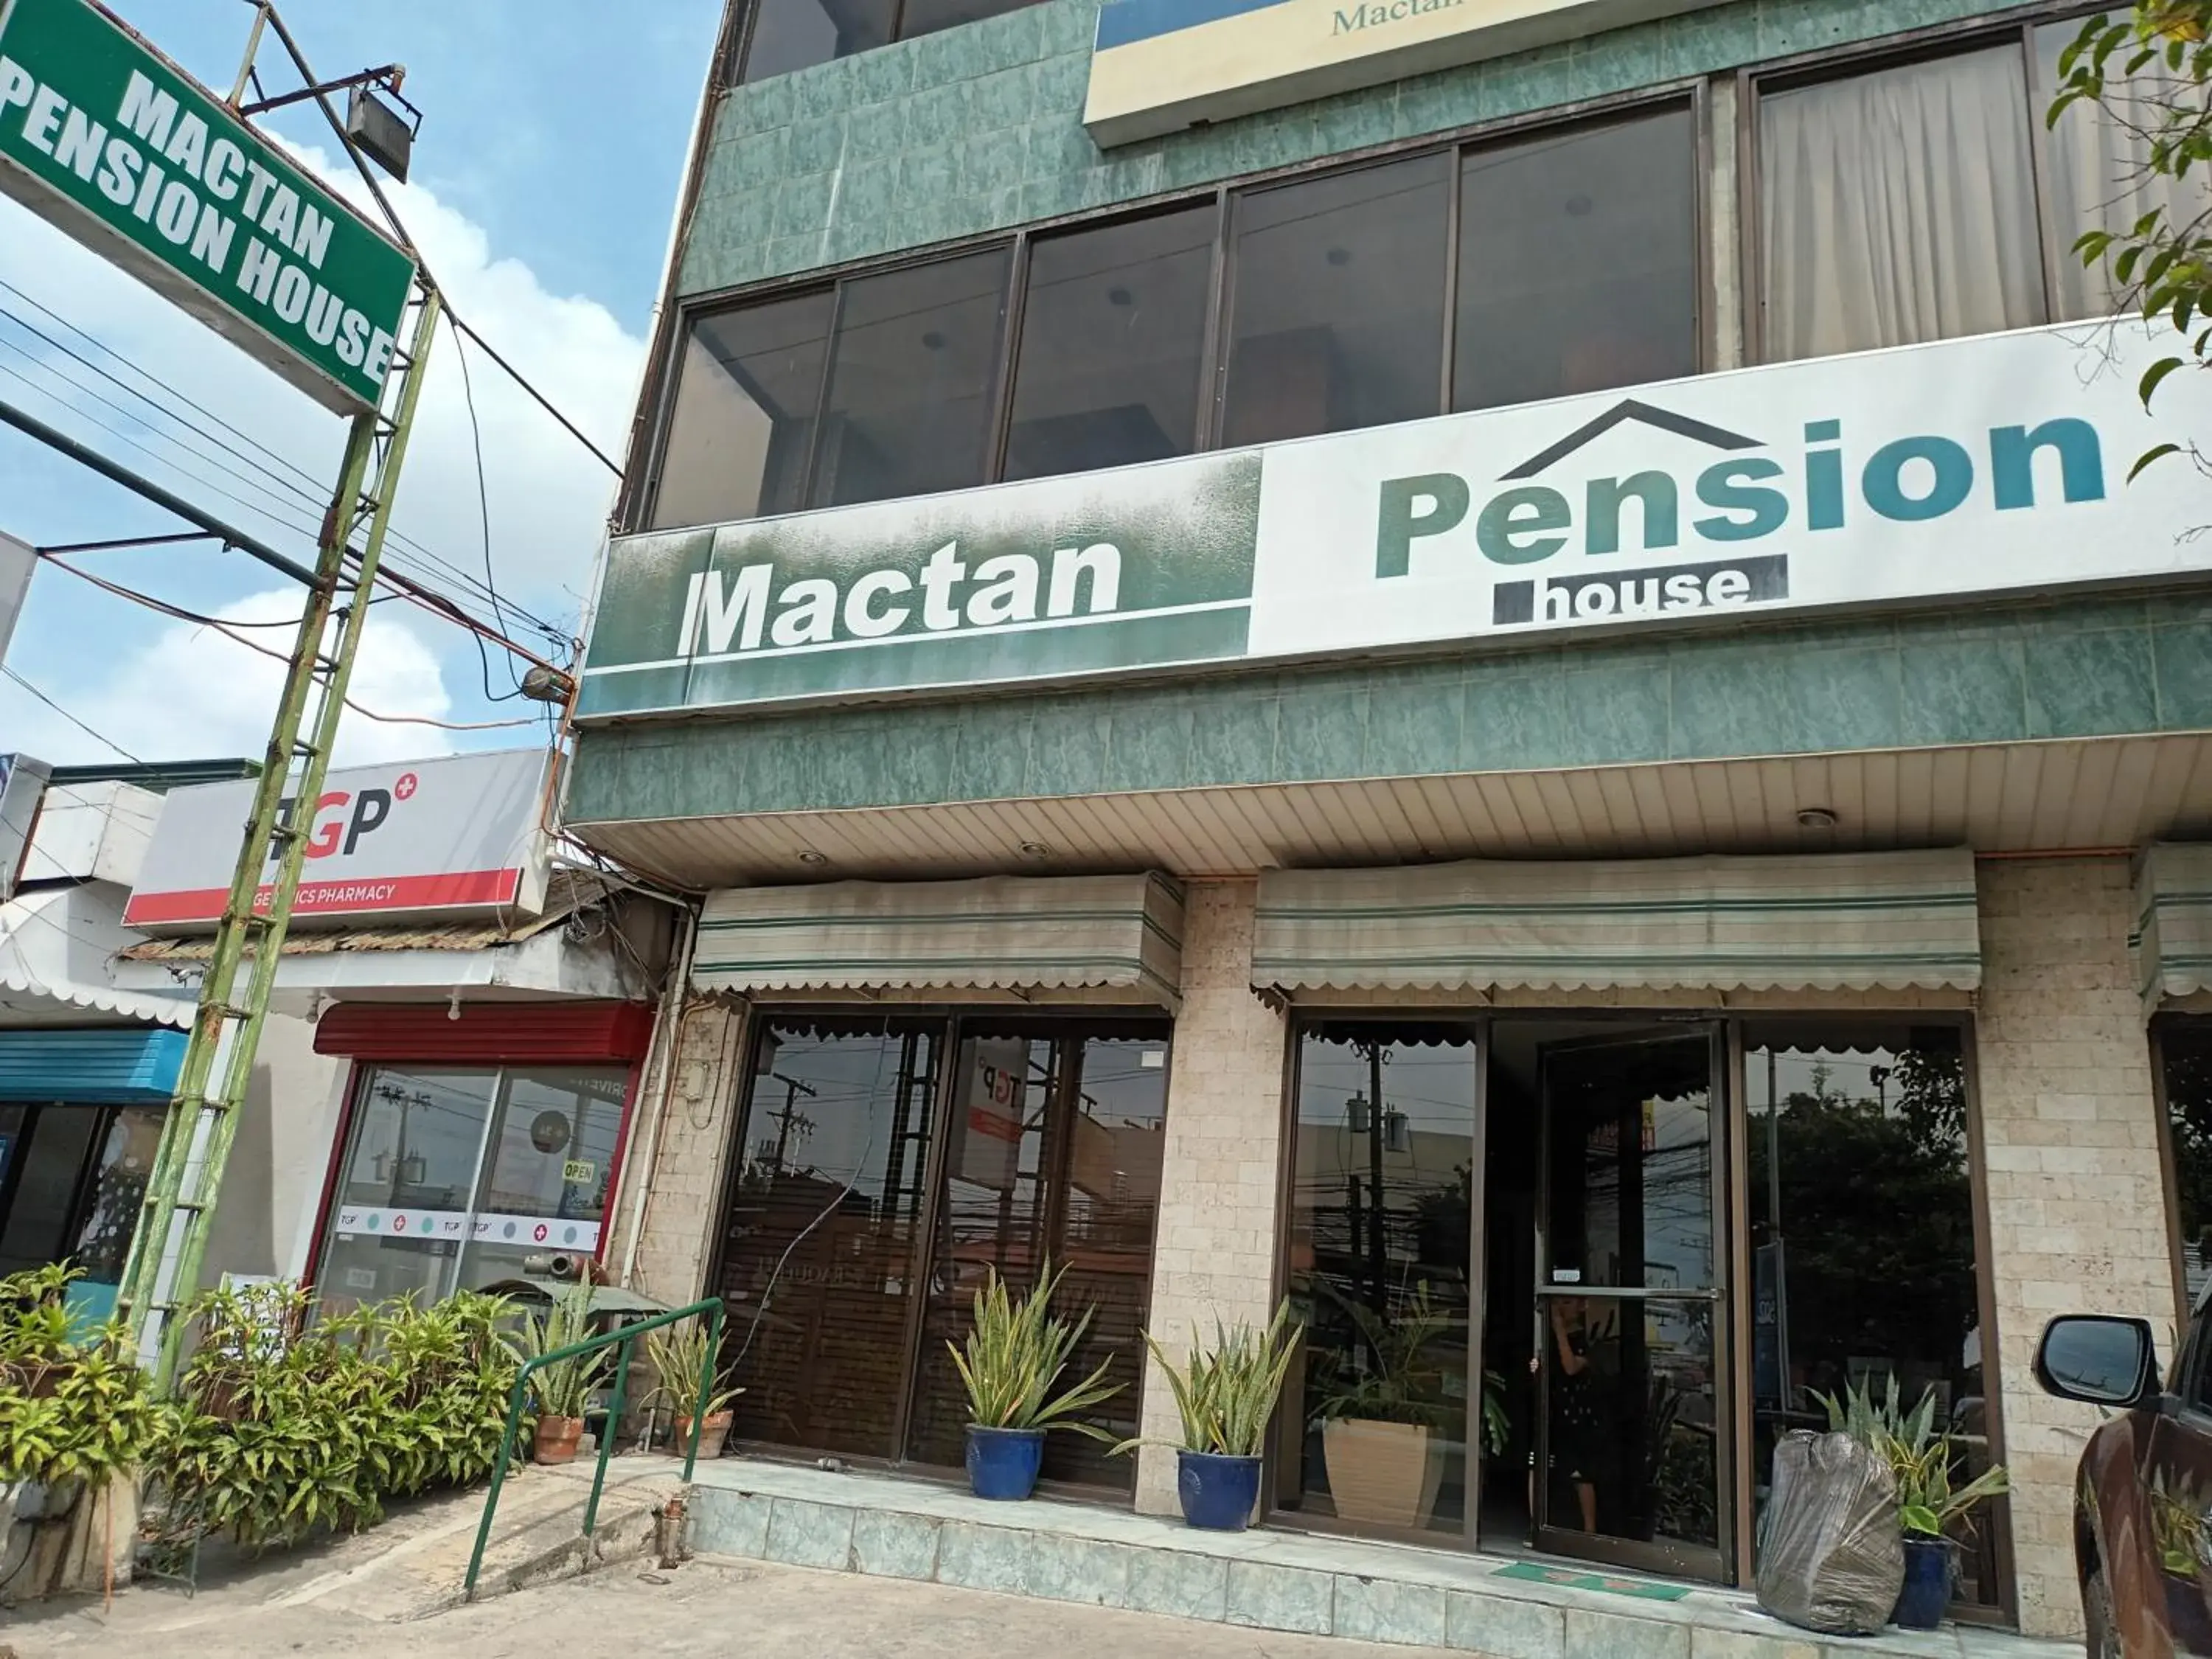 Property Building in Mactan Pension House